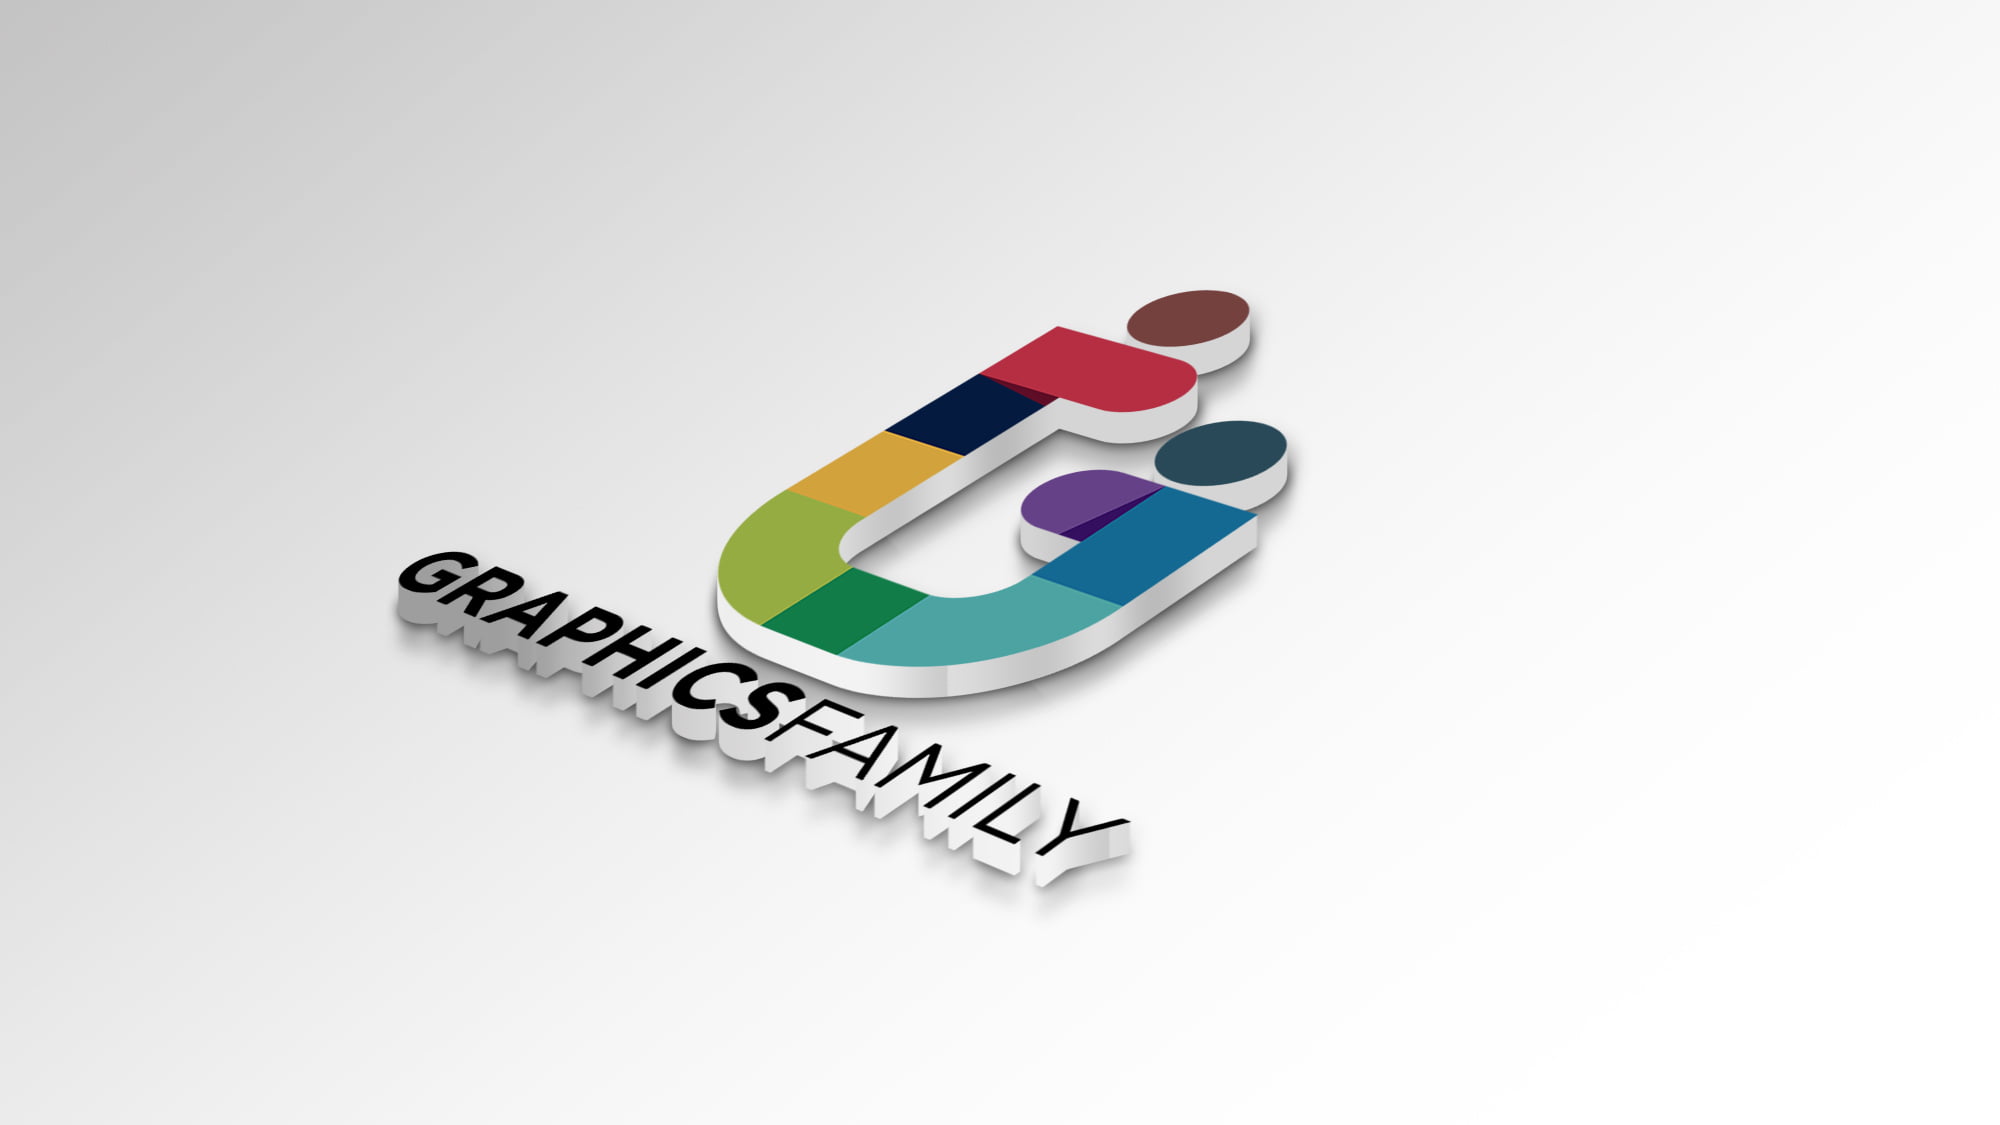 Graphicsfamily logo on white paper